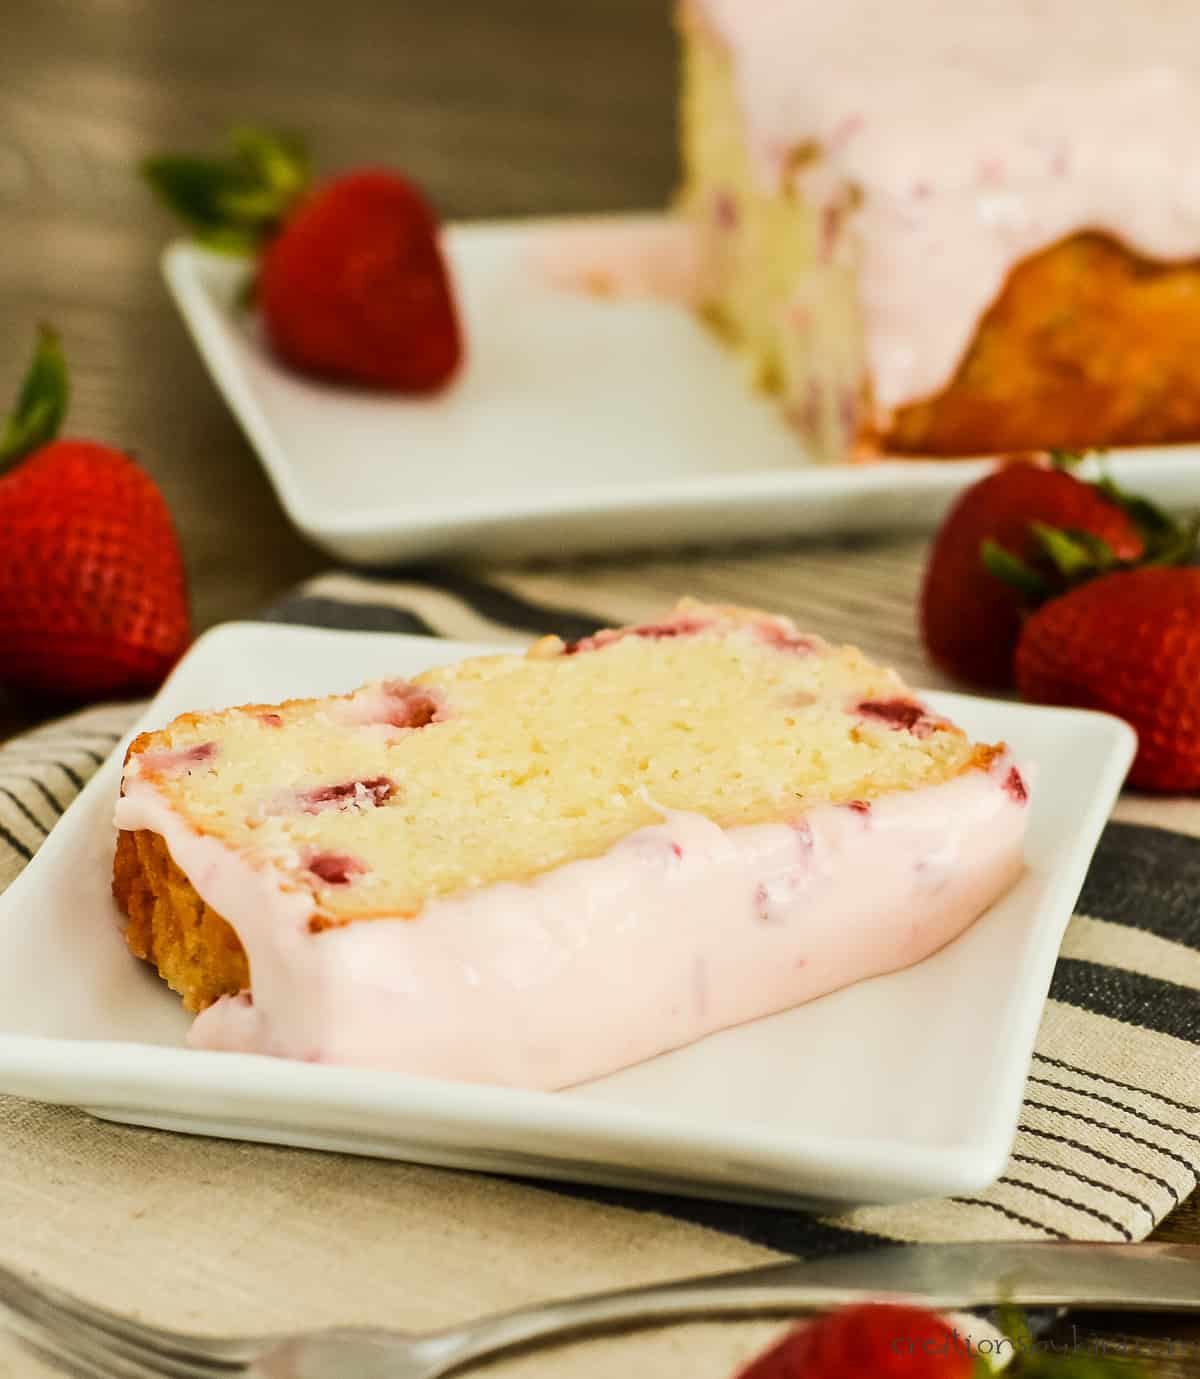 slice of strawberry pound cake on a plate with a cut cake in the background